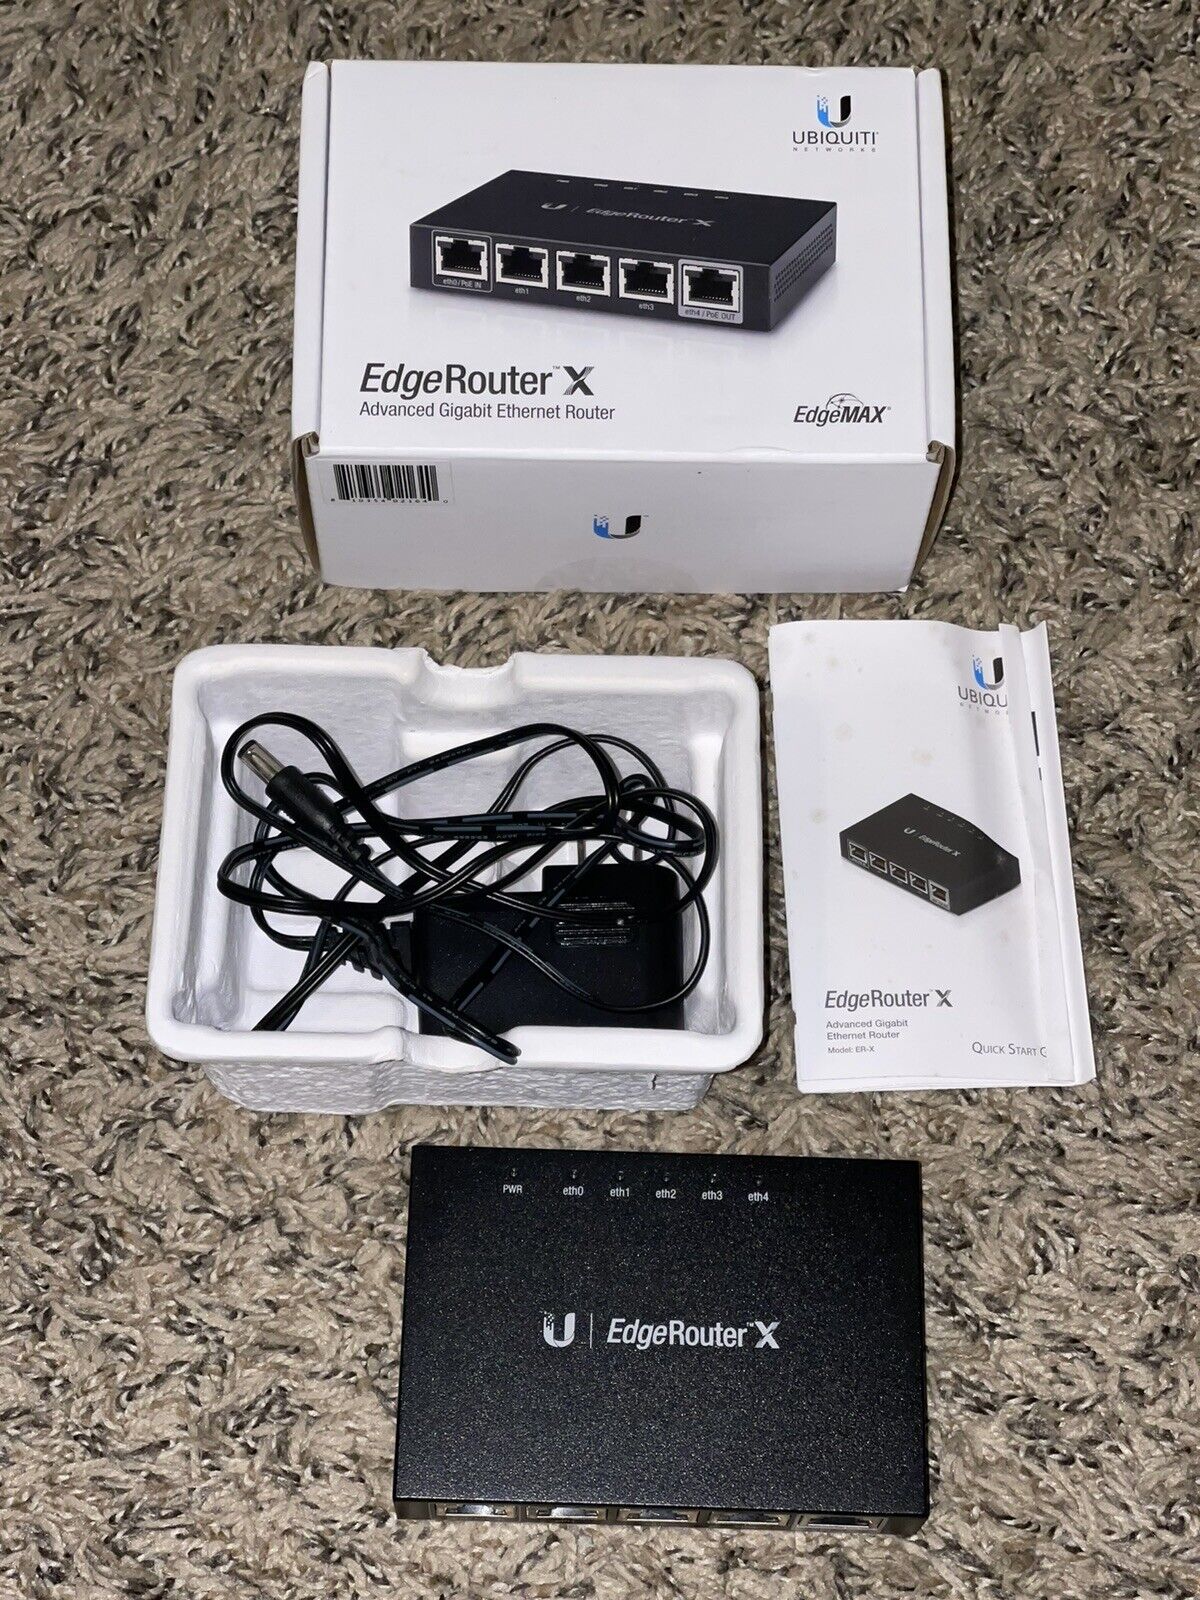 Ubiquiti Networks ER-X EdgeRouter X 5-Port Gigabit Wired Router w/ Adapter